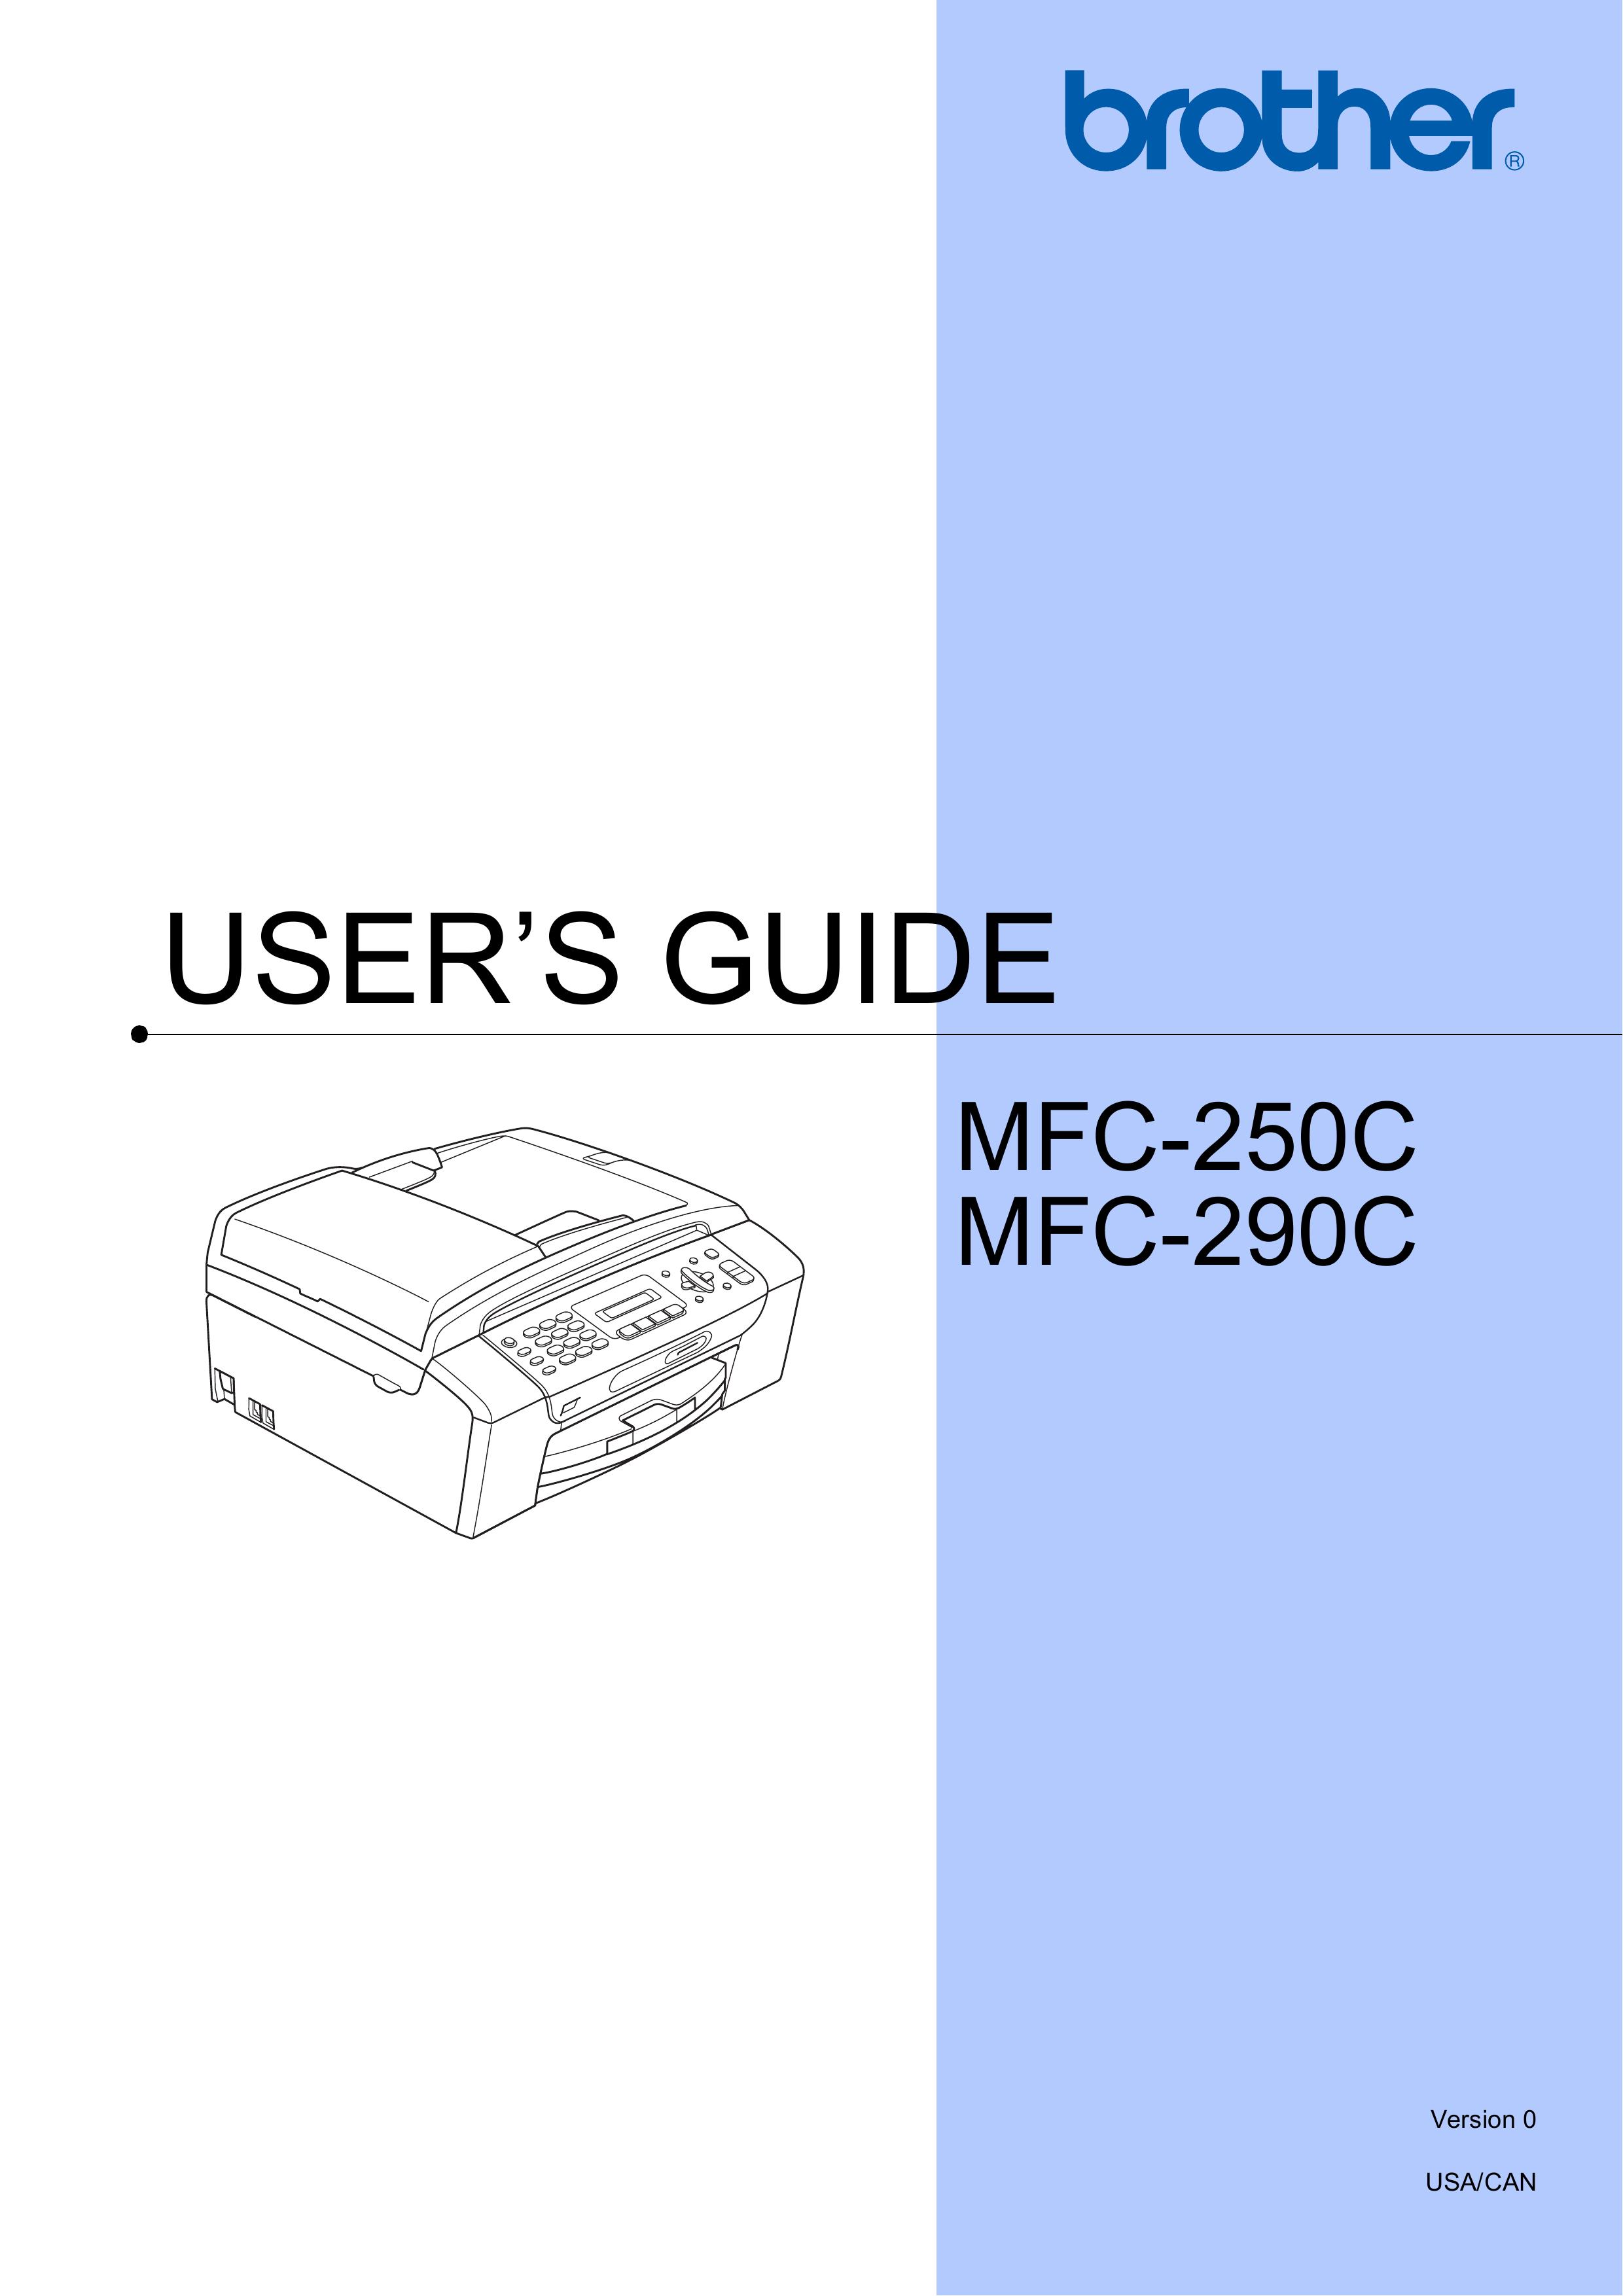 Brother MFC-250C Toaster User Manual